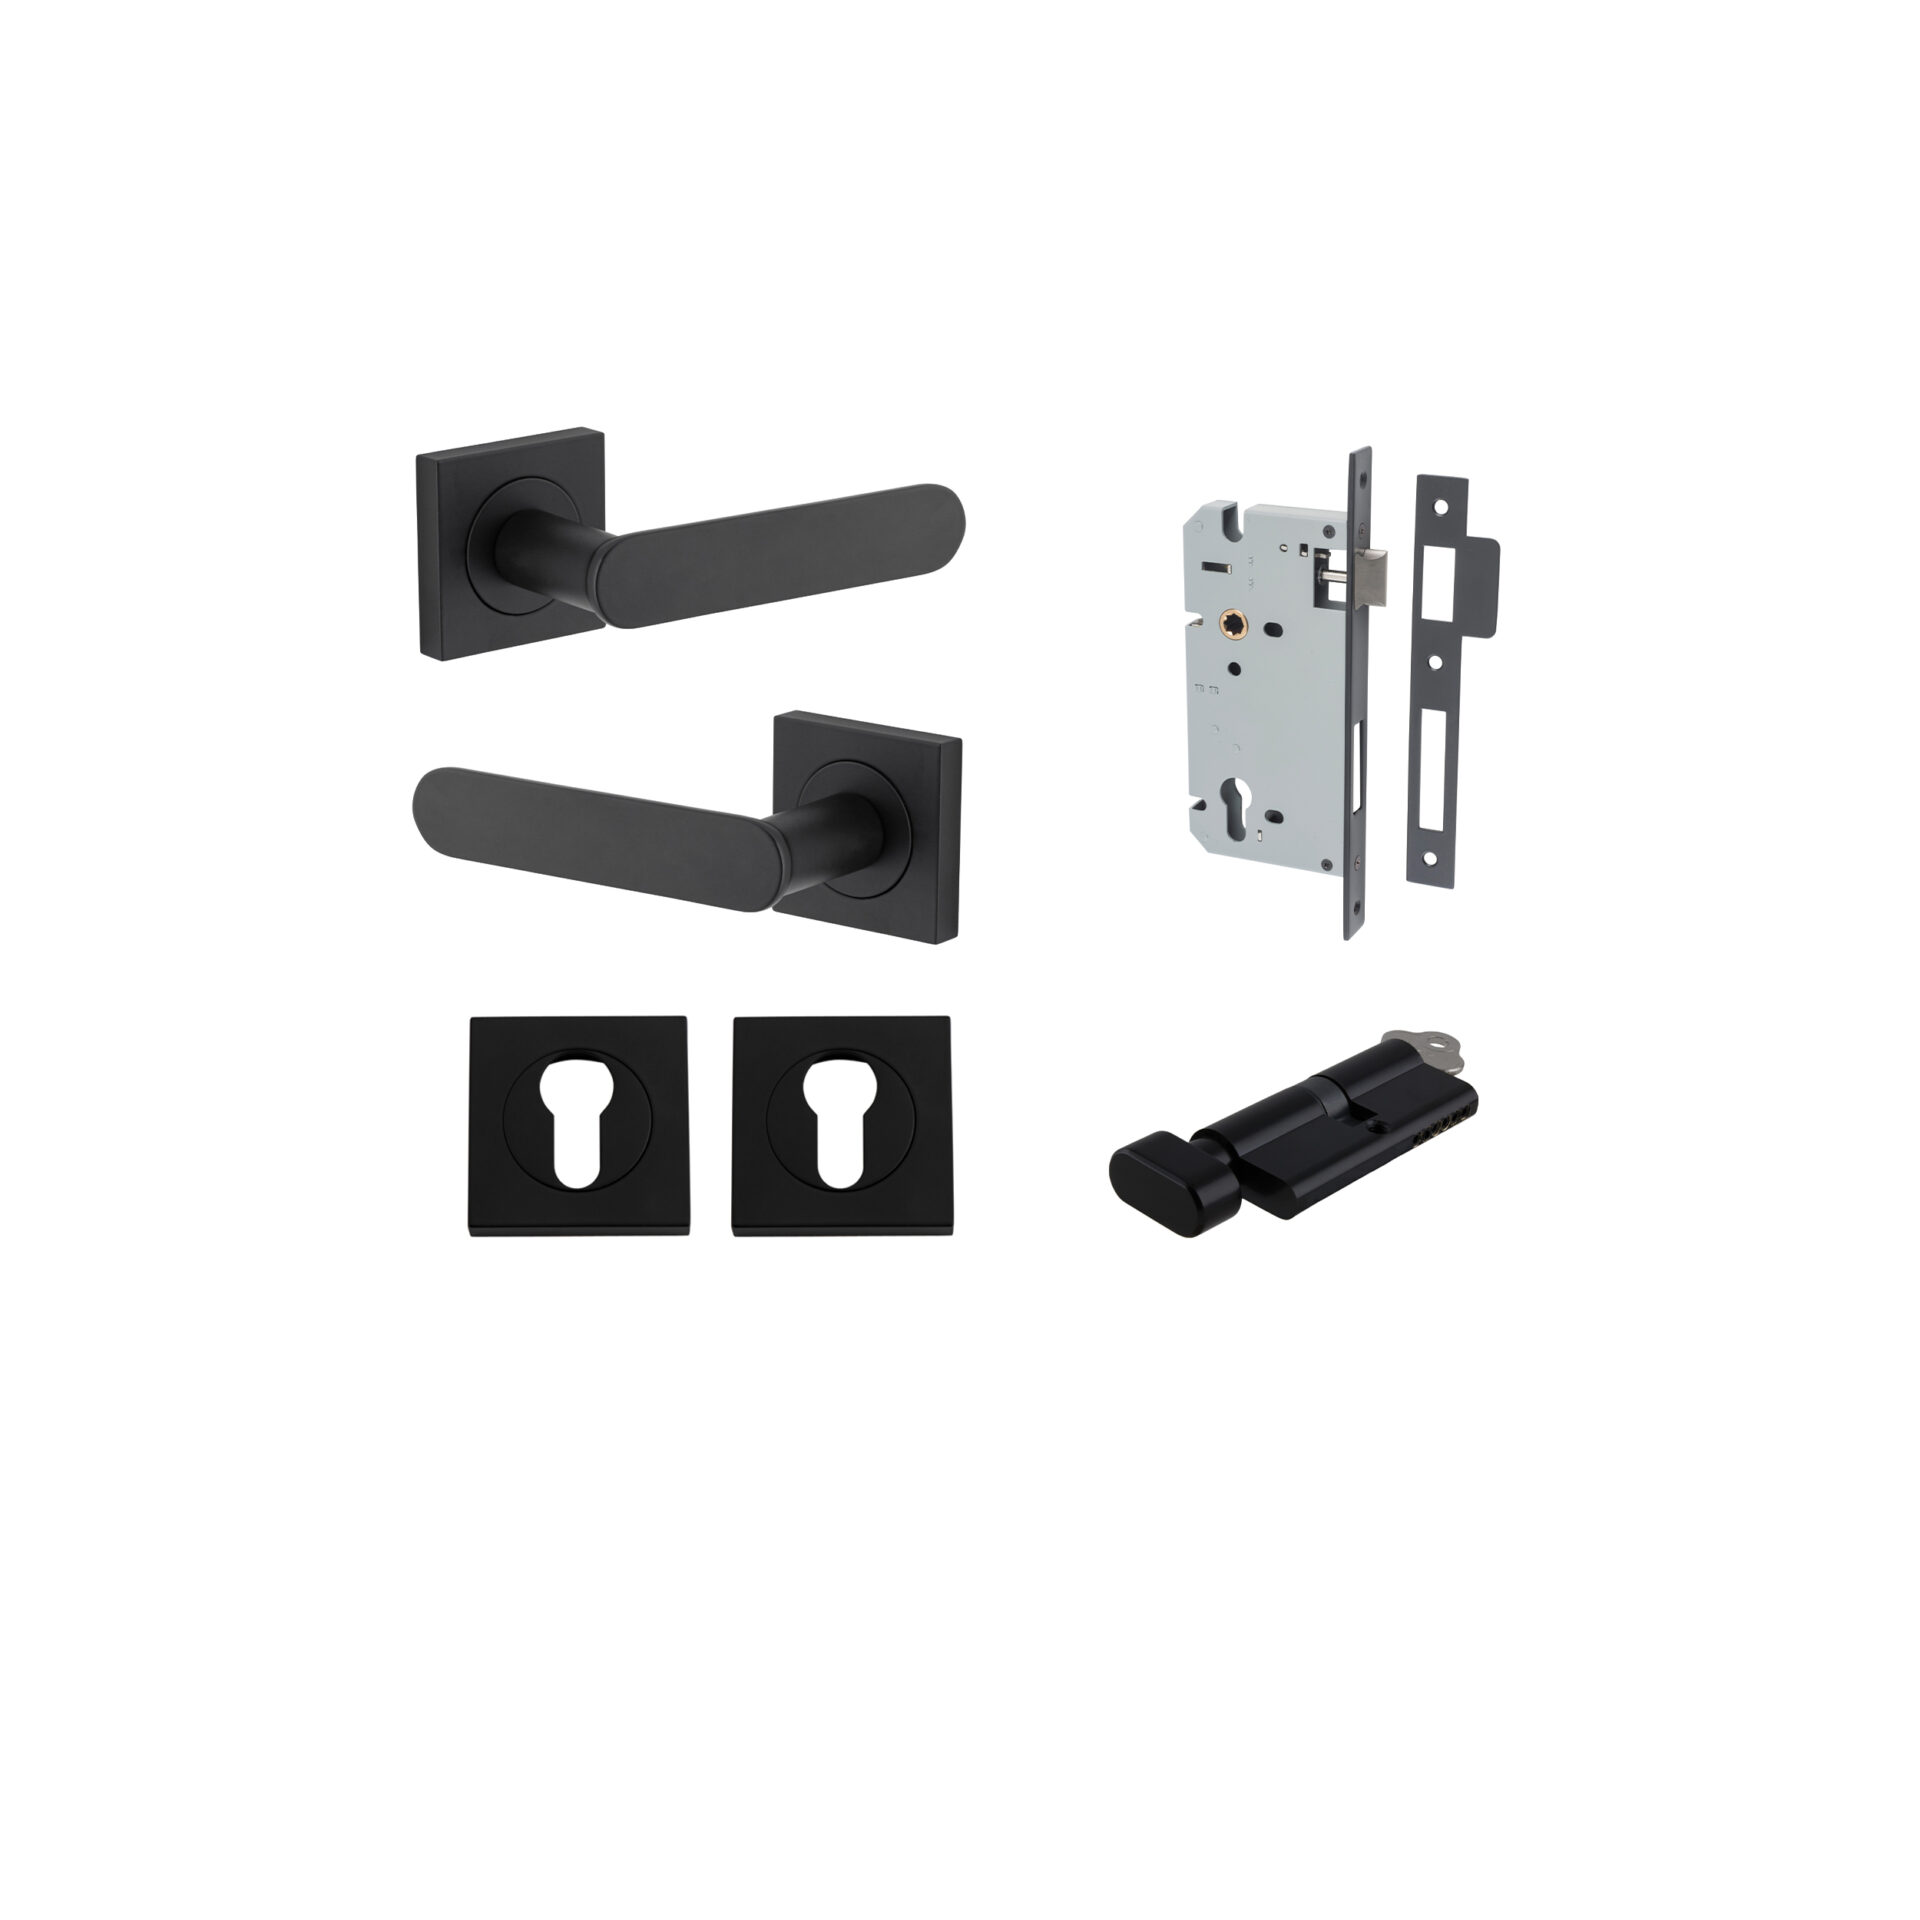 Bronte Lever - Square Rose Entrance Kit with High Security Lock